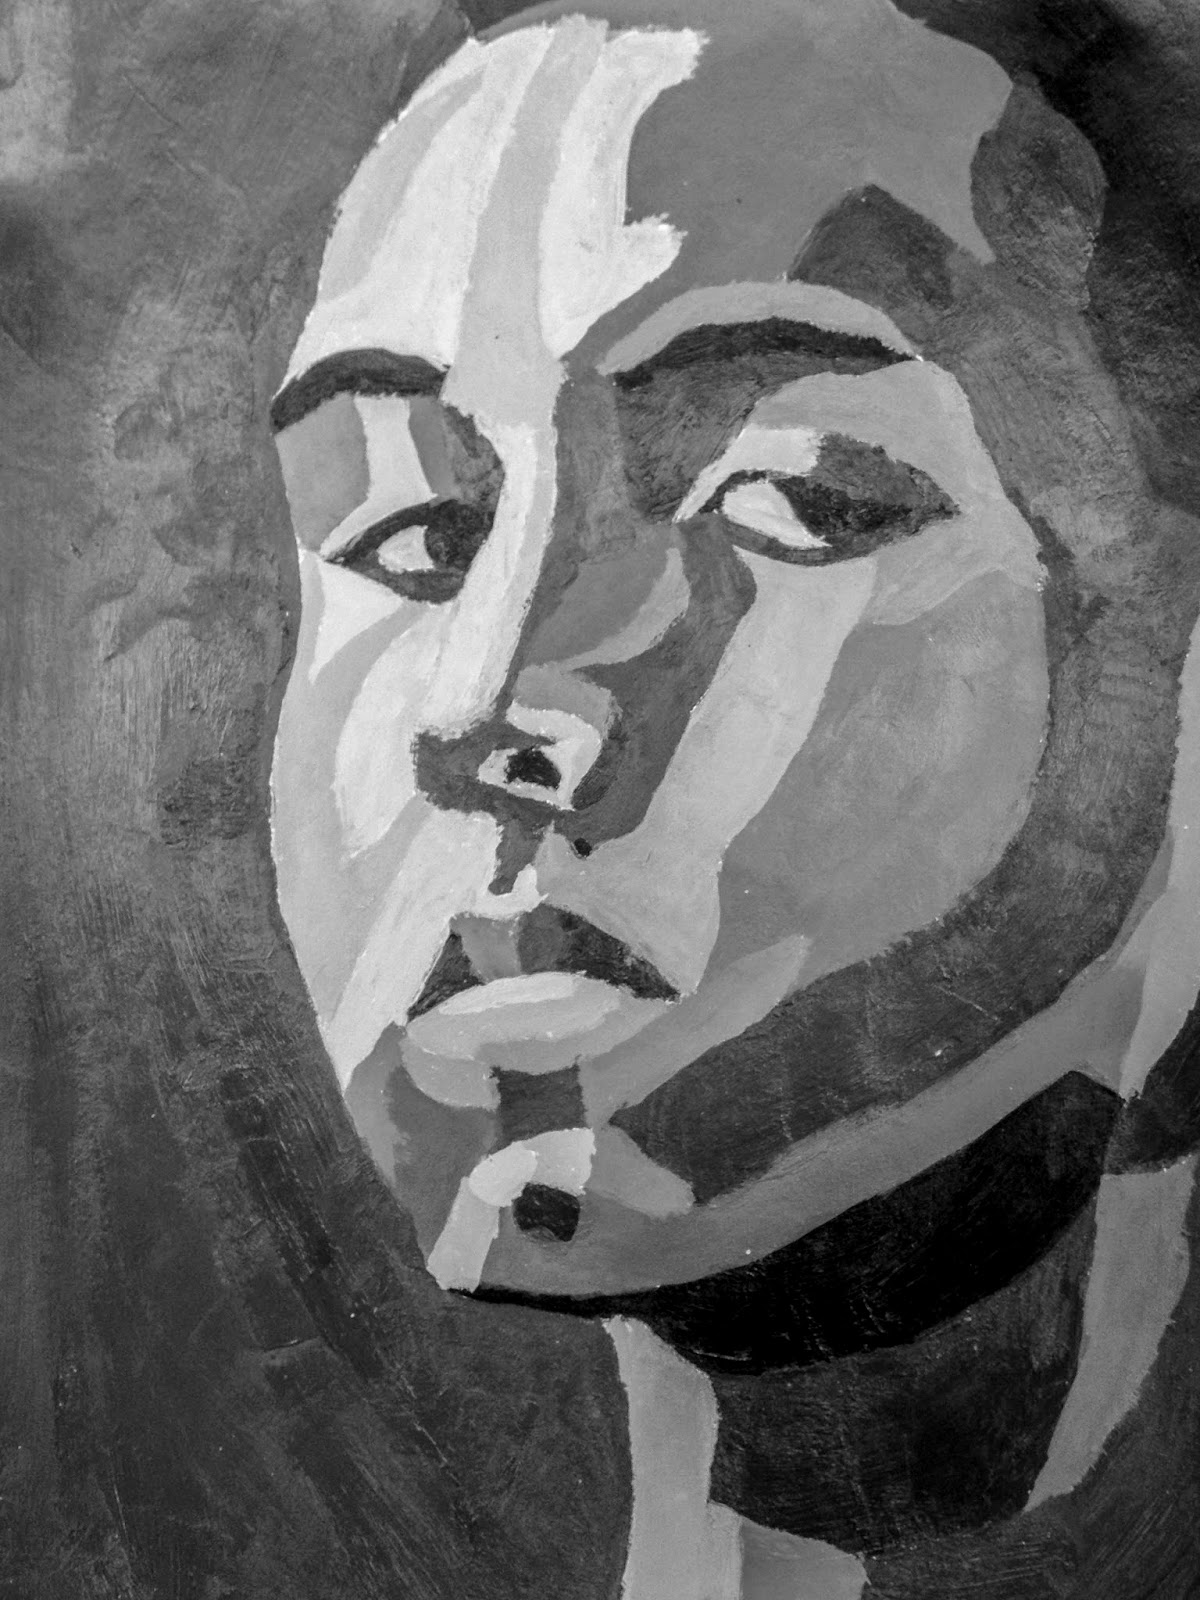 NWSA-2D Art: PROJECT 06: Painted Self-Portrait in Greyscale. Due Nov